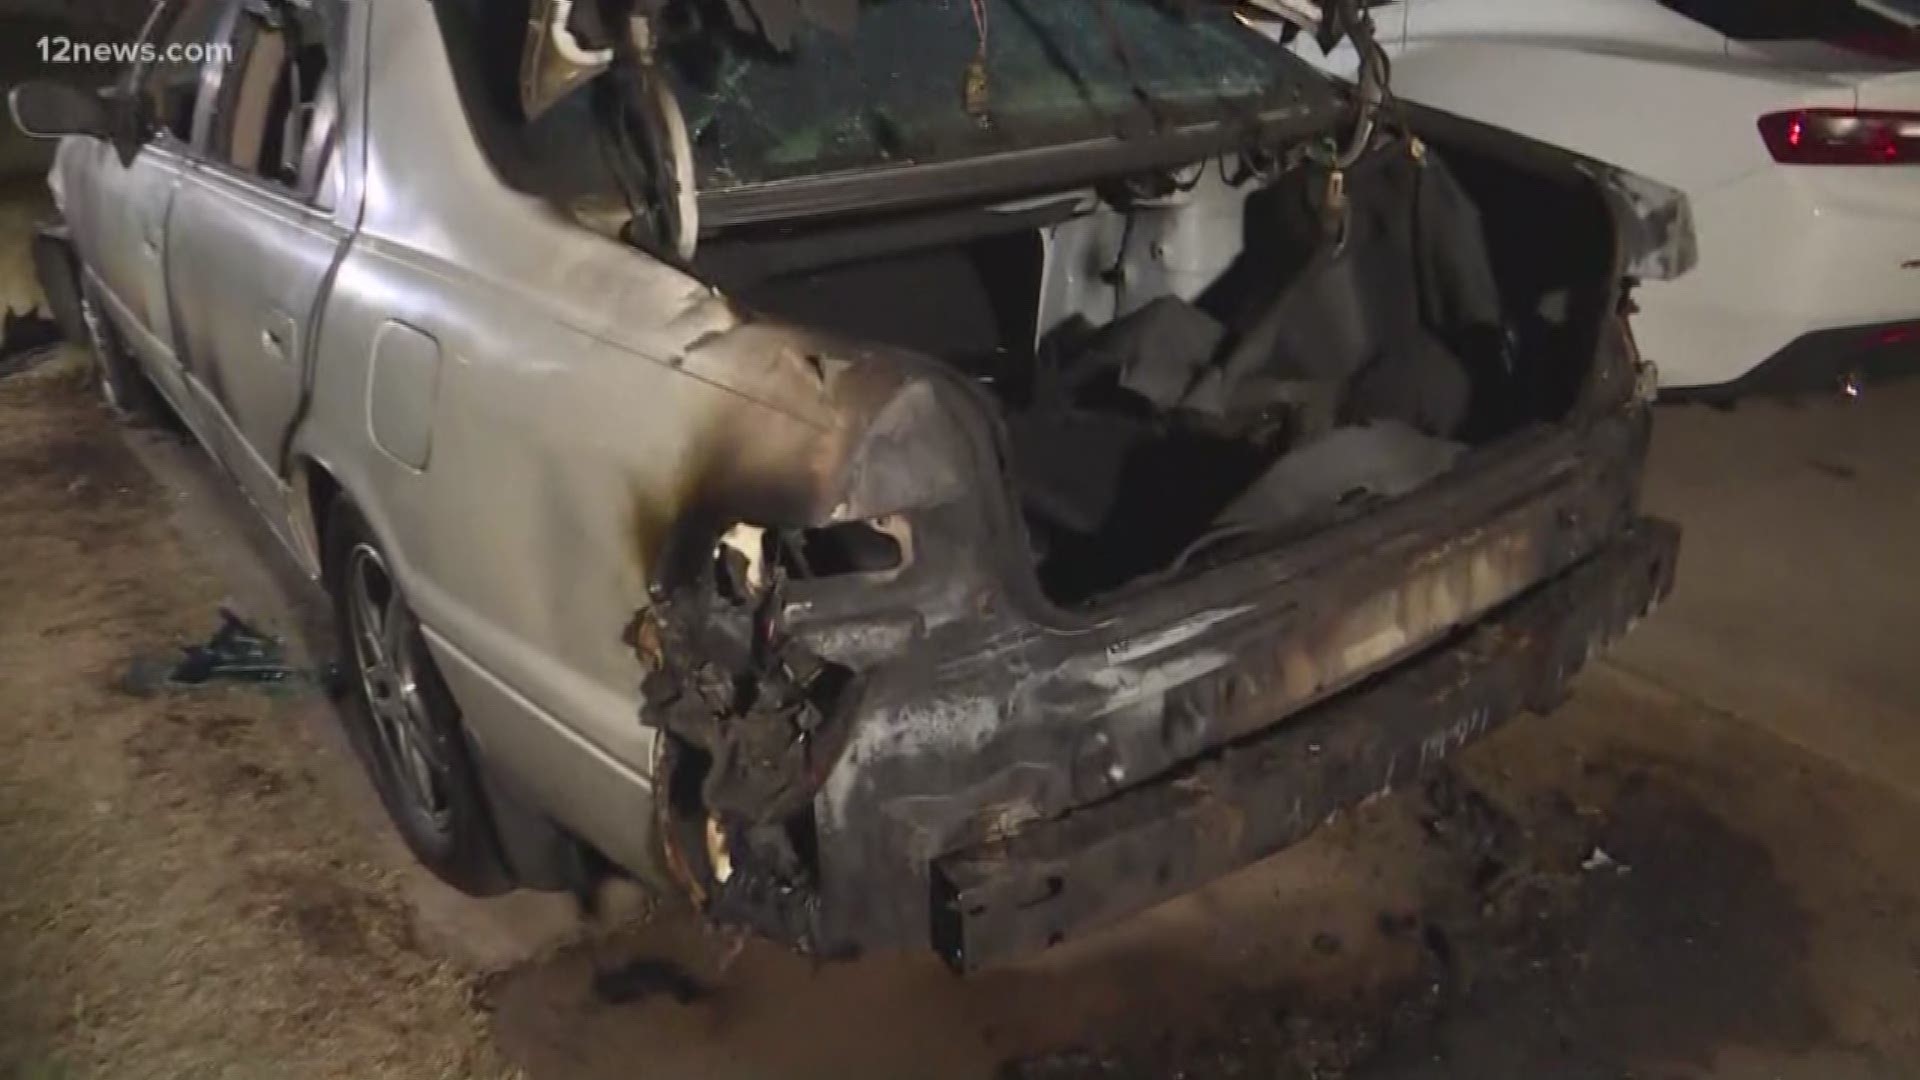 The hunt is on for possible arsonists after cameras caught someone setting a teenager's car on fire just feet from the family's doorstep. More surveillance video shows two people setting a tree on fire in the same neighborhood.